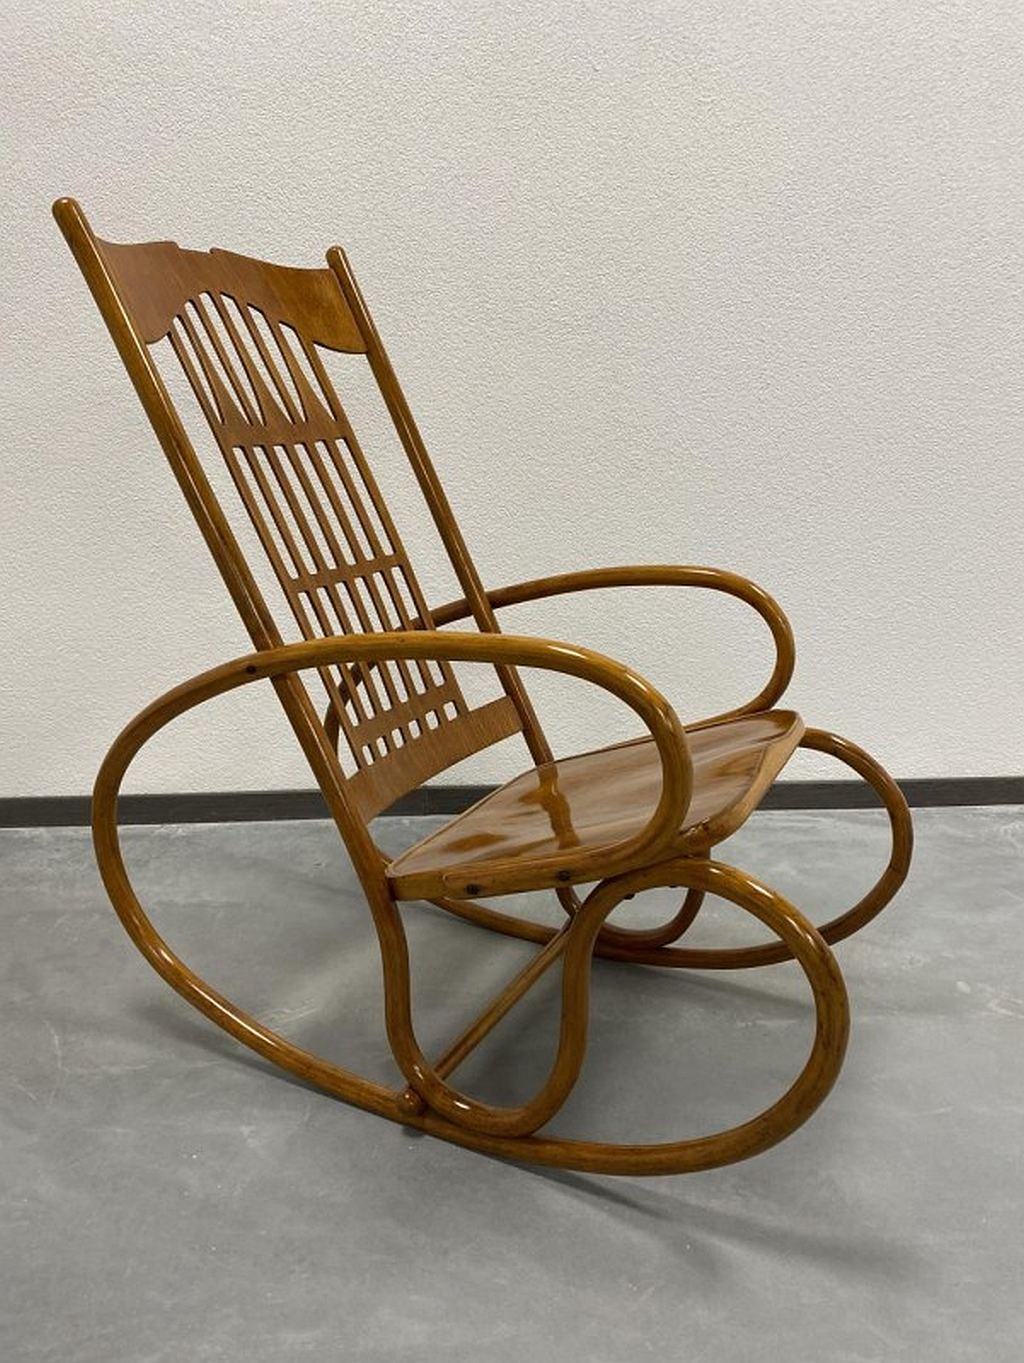 Rocking chair no.813 by Koloman Moser for J.J.Kohn. Professionally stained and repolished.